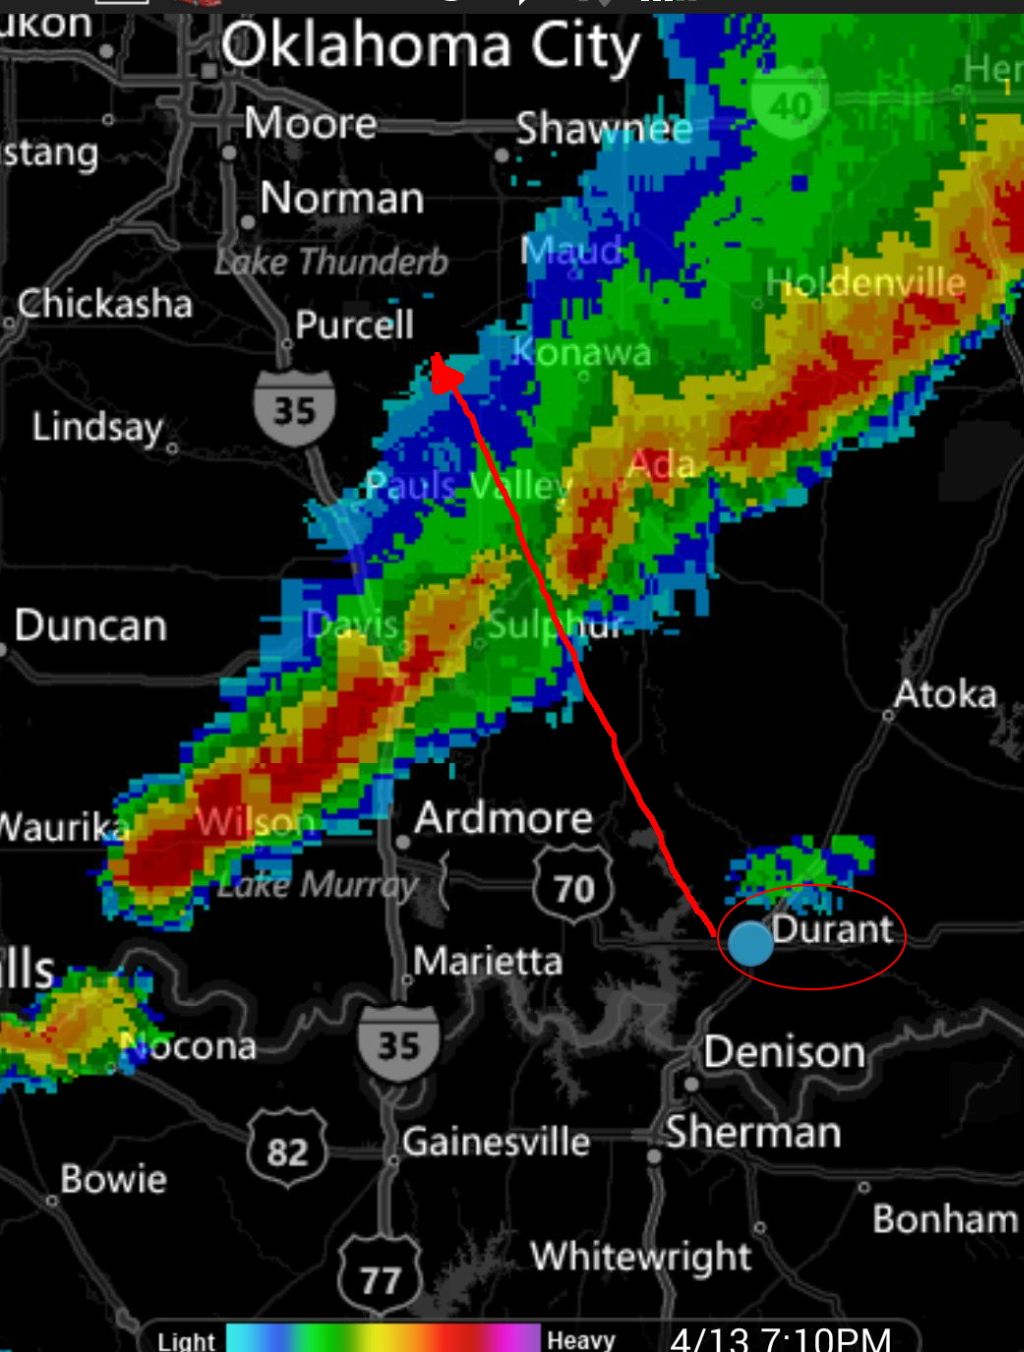 Here's the storm radar.  We're in Durant.  The red line and arrow shows the path the storm took and how we slipped between a split between the worst part of the storm.